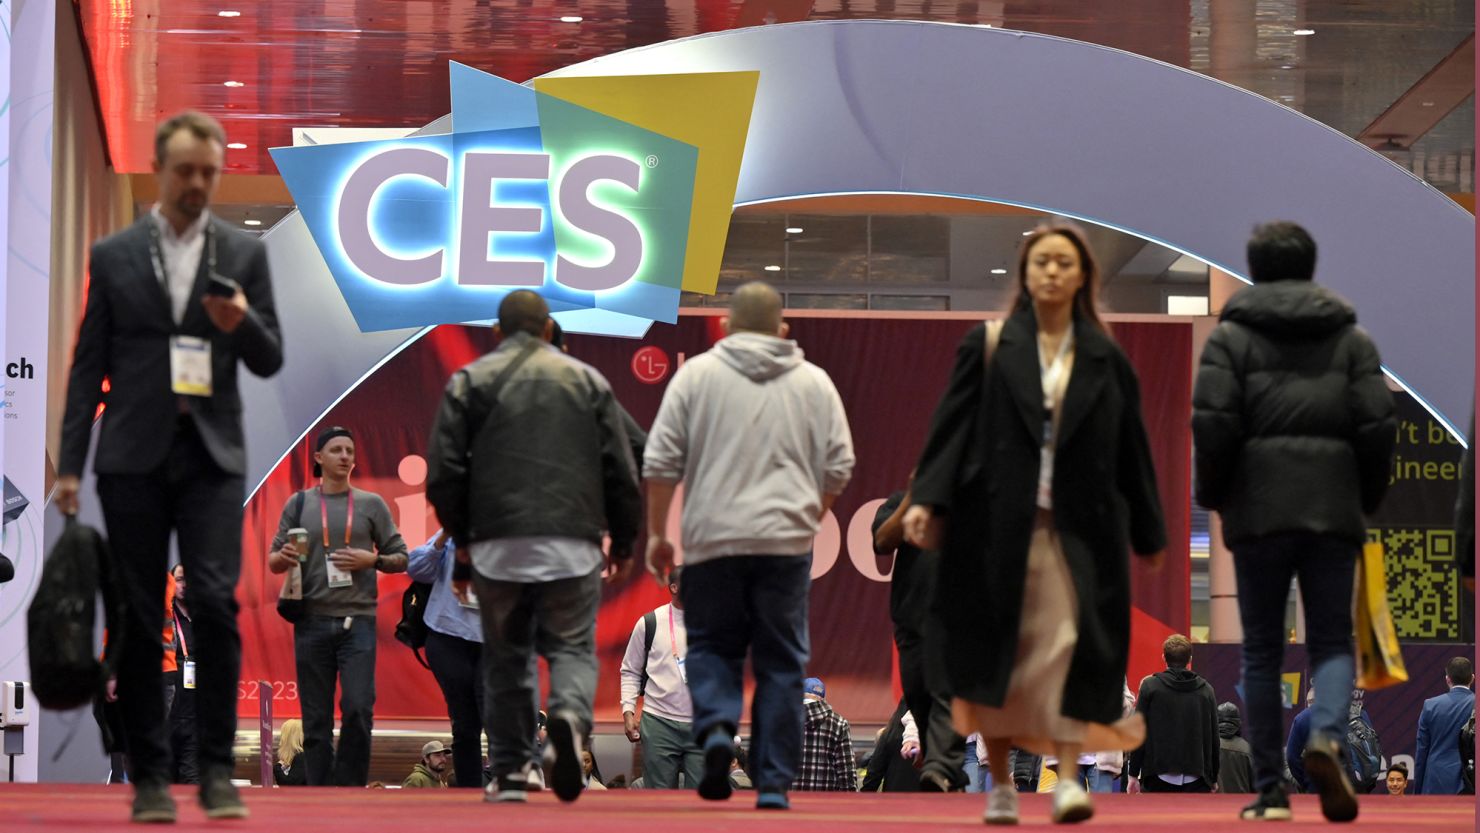 Attendees arrive for the opening of CES 2023 at the Las Vegas Convention Center on January 5, 2023.